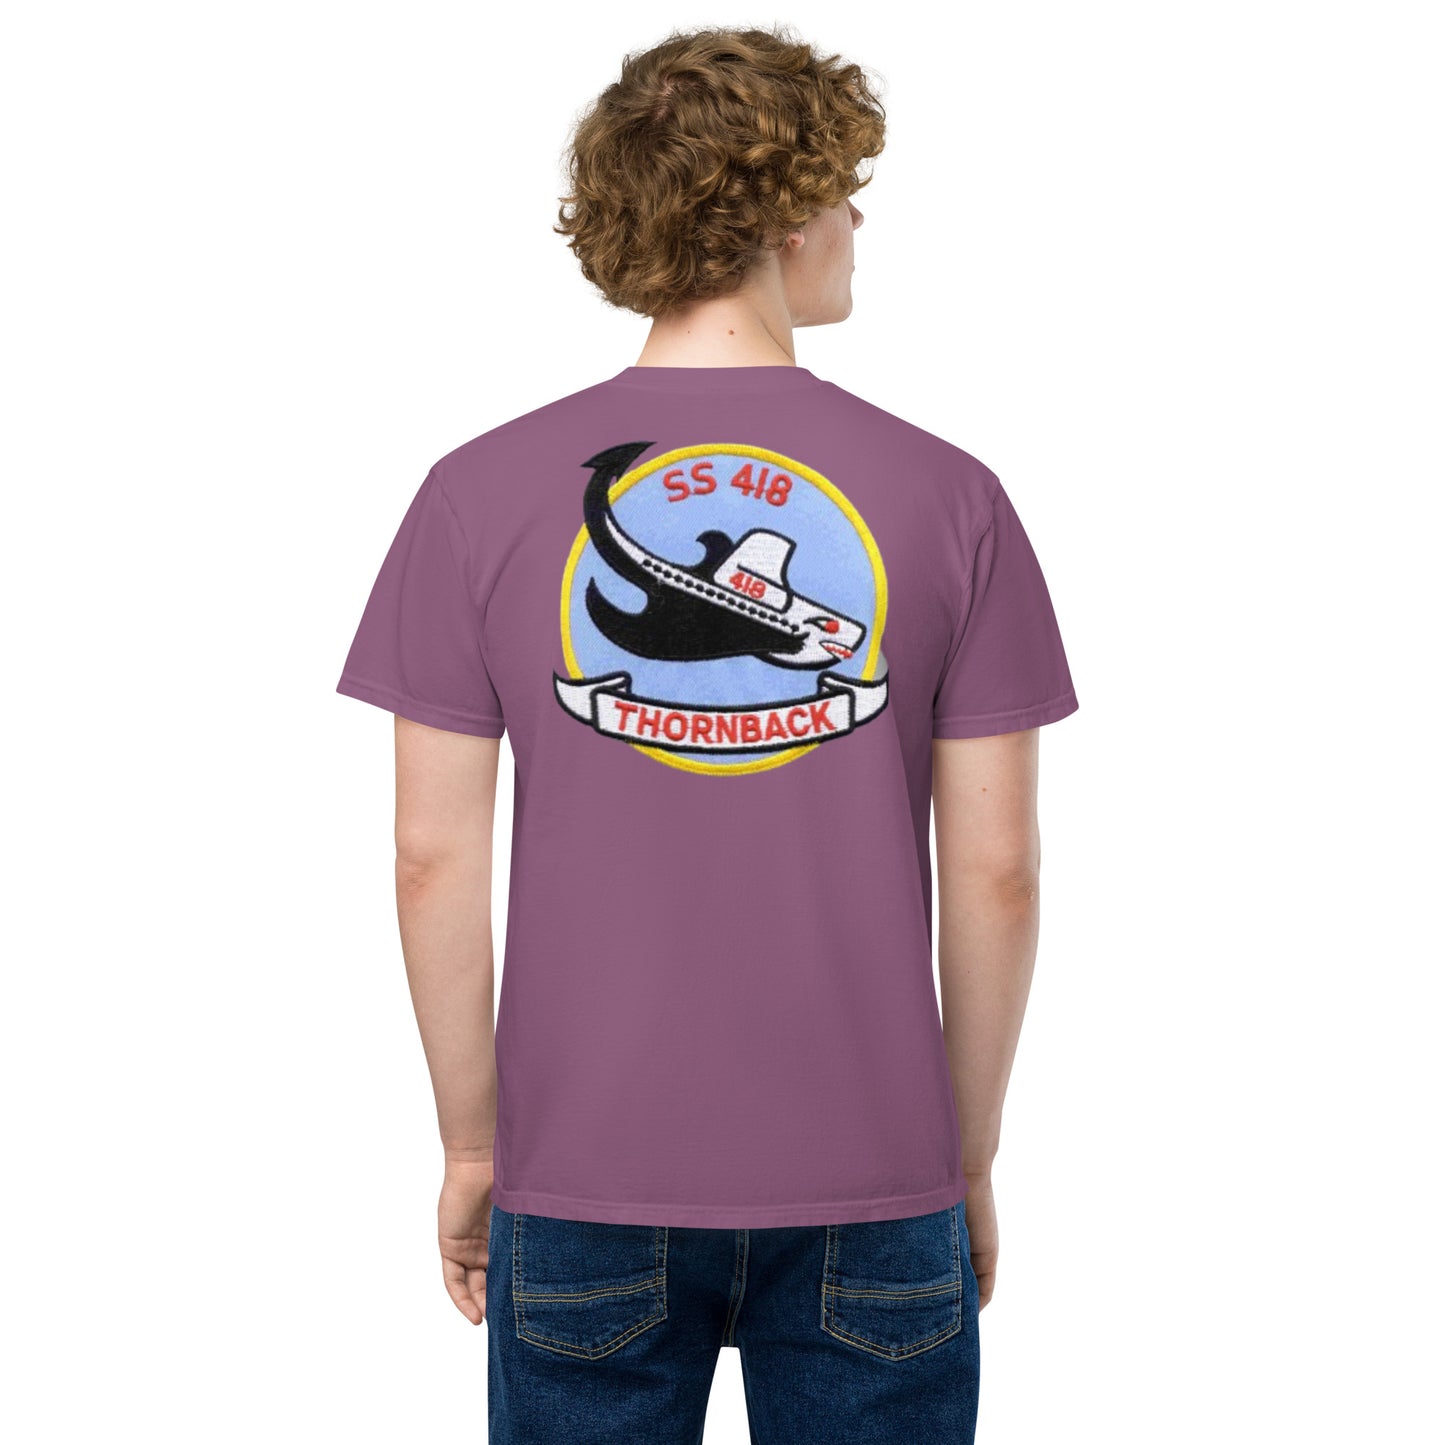 "THE BARNEY" a Tribute Tee